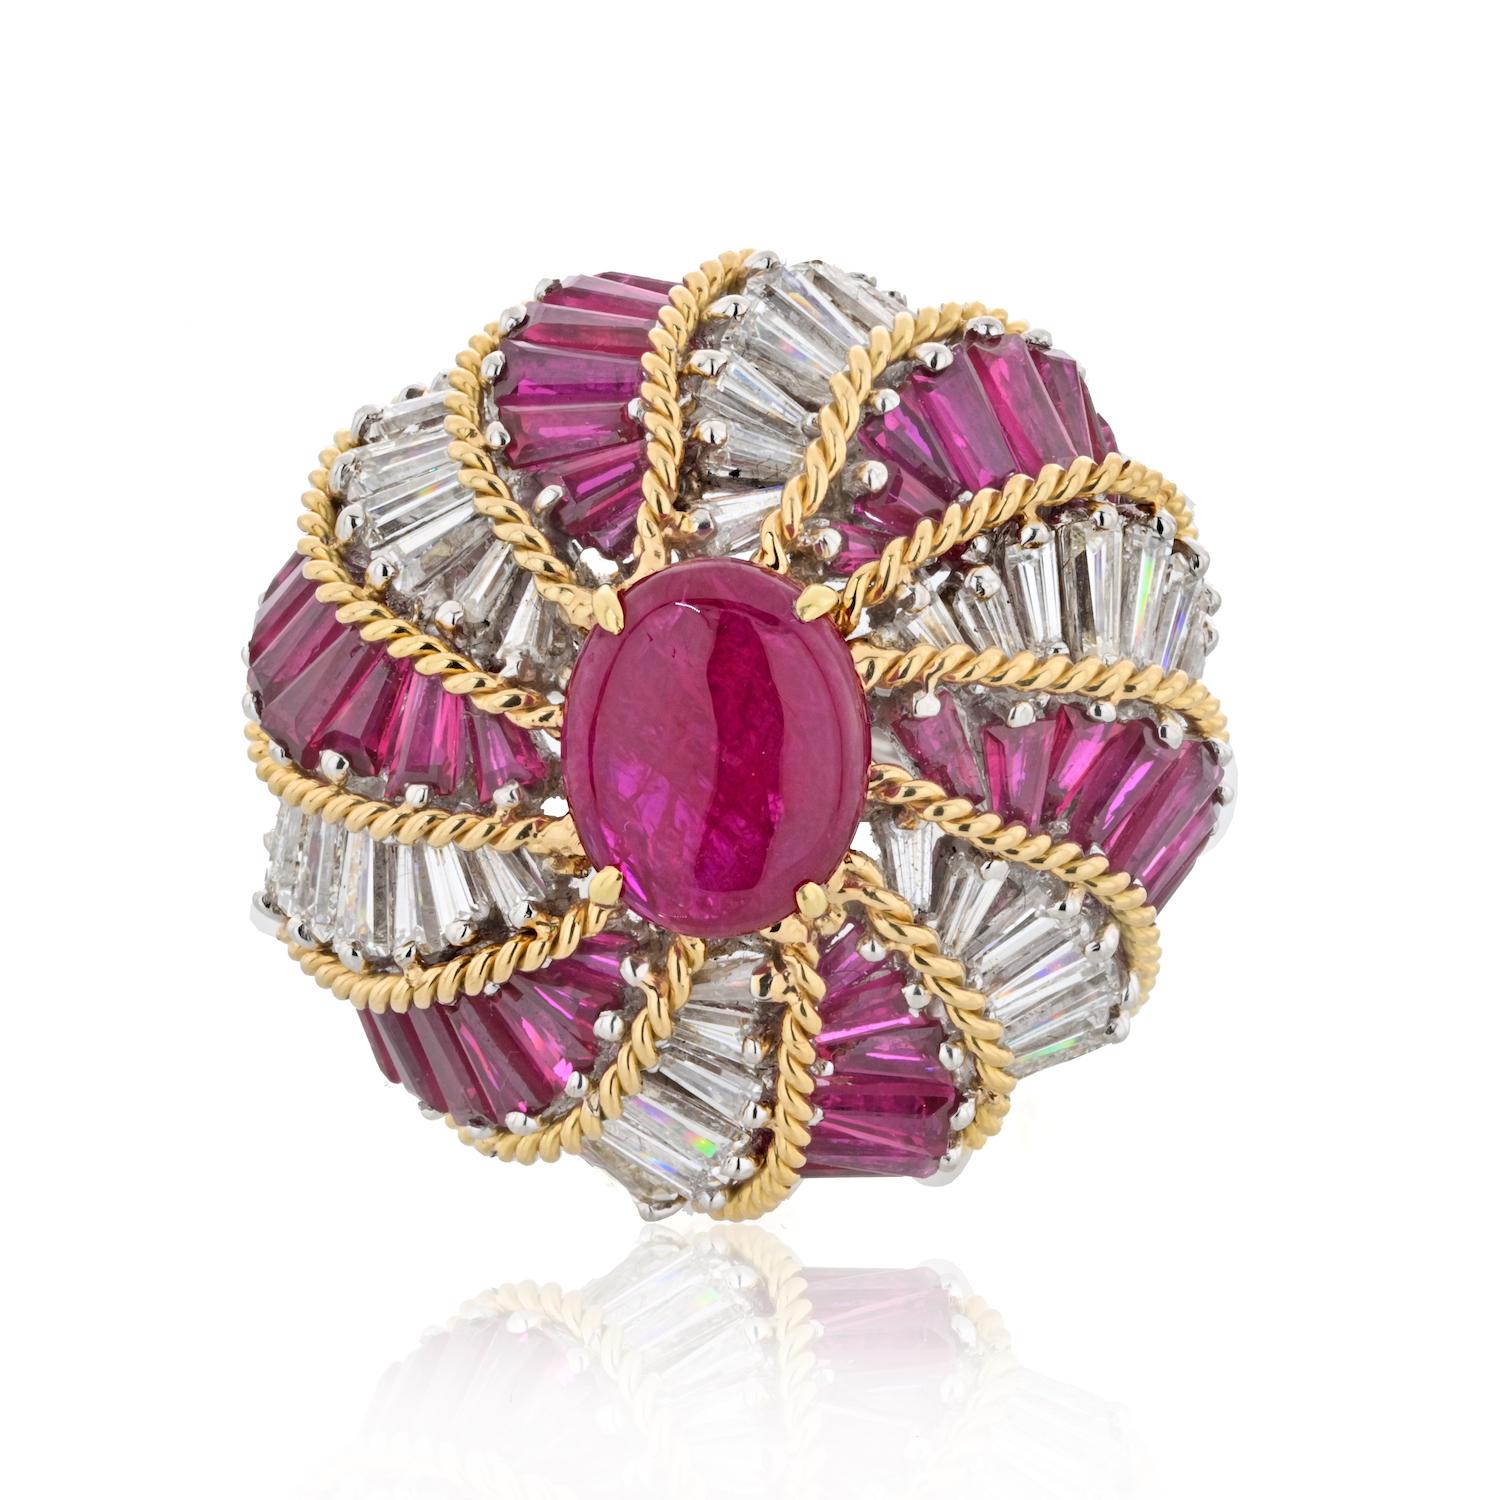 Step into a world of opulence and artistry with the David Webb Turban Diamond and Ruby Ring, a mesmerizing masterpiece in platinum and 18k yellow gold. At its heart, a resplendent center ruby measuring approximately 11mm x 9mm, boasting a